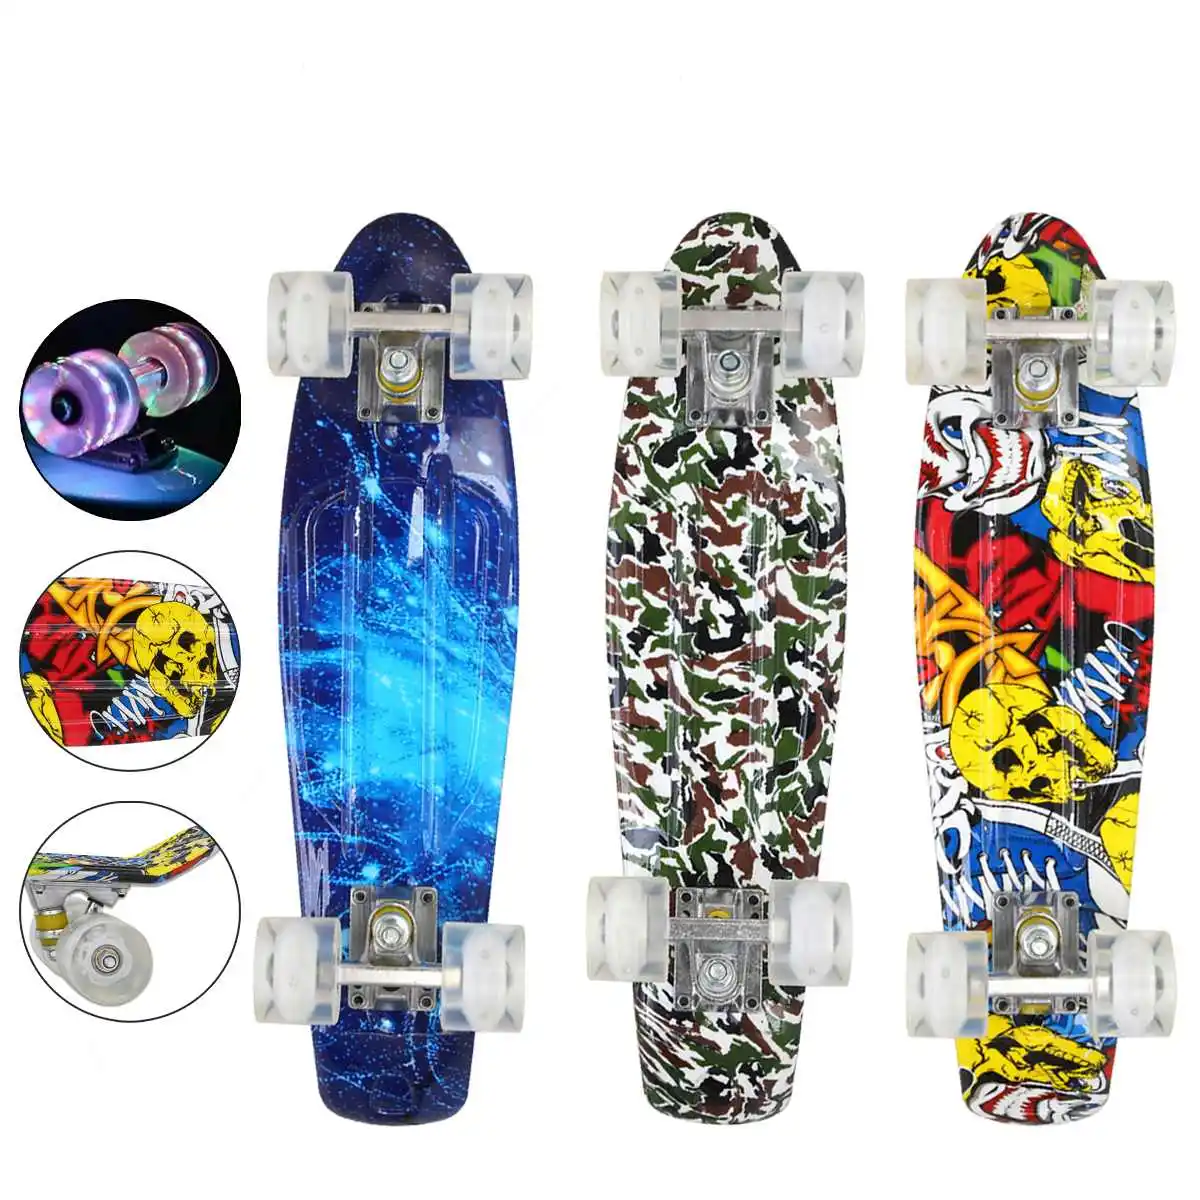 

22 inch Four-Wheeled Skateboard for Beginners and Kids Wood Scooters Double Deck Skating Board graffiti skateboard road brush